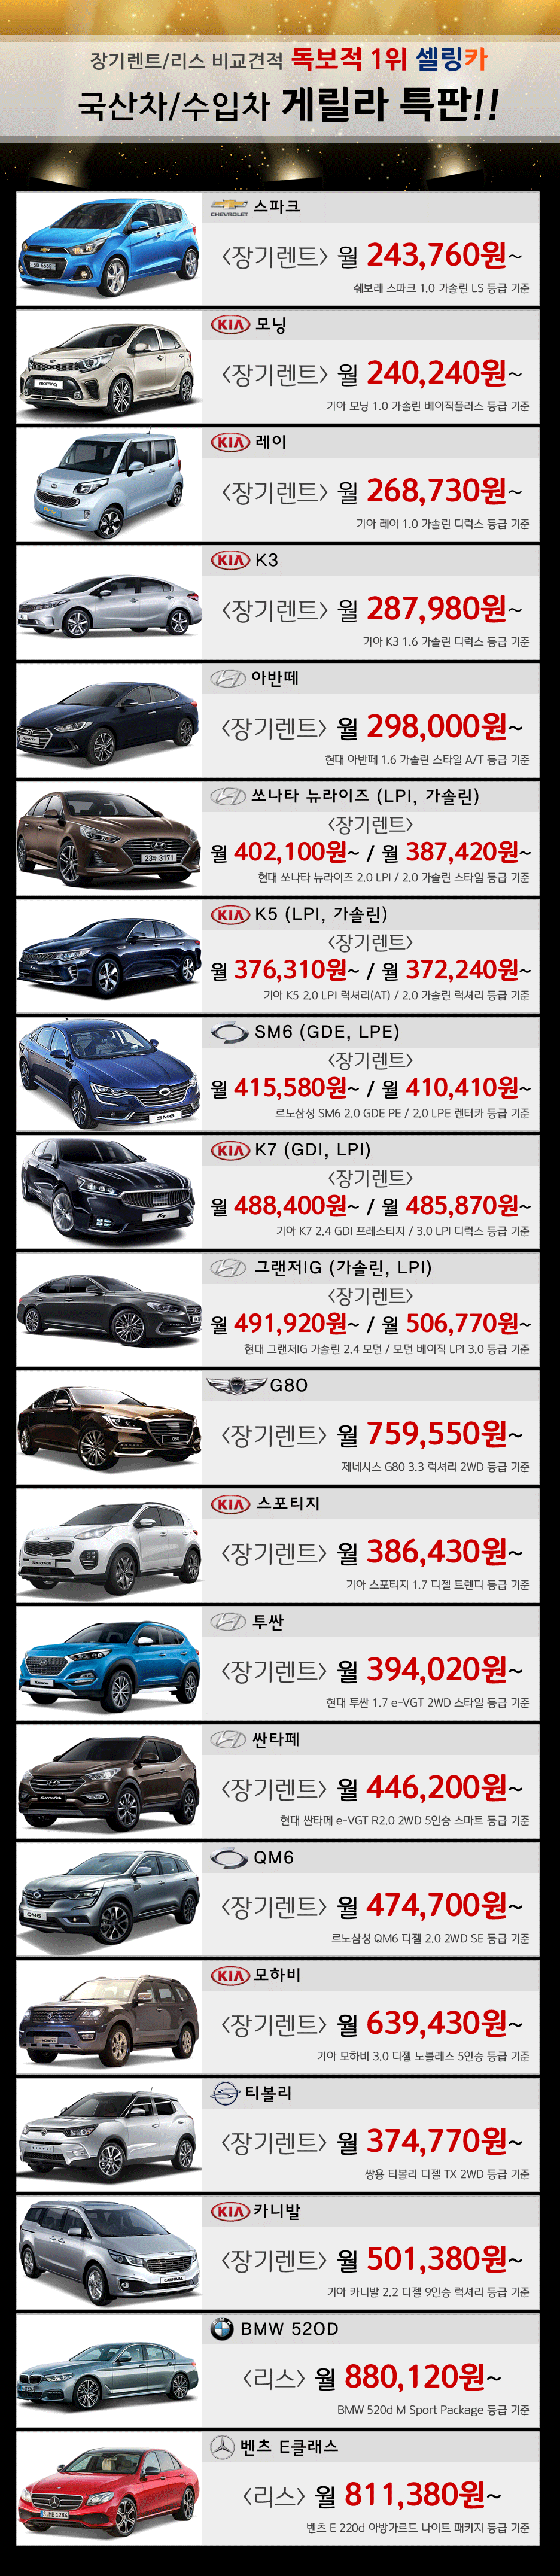 FireShot Capture 7 - 셀링카 - http___sellingcar.kr_xe_page_RENs31.png